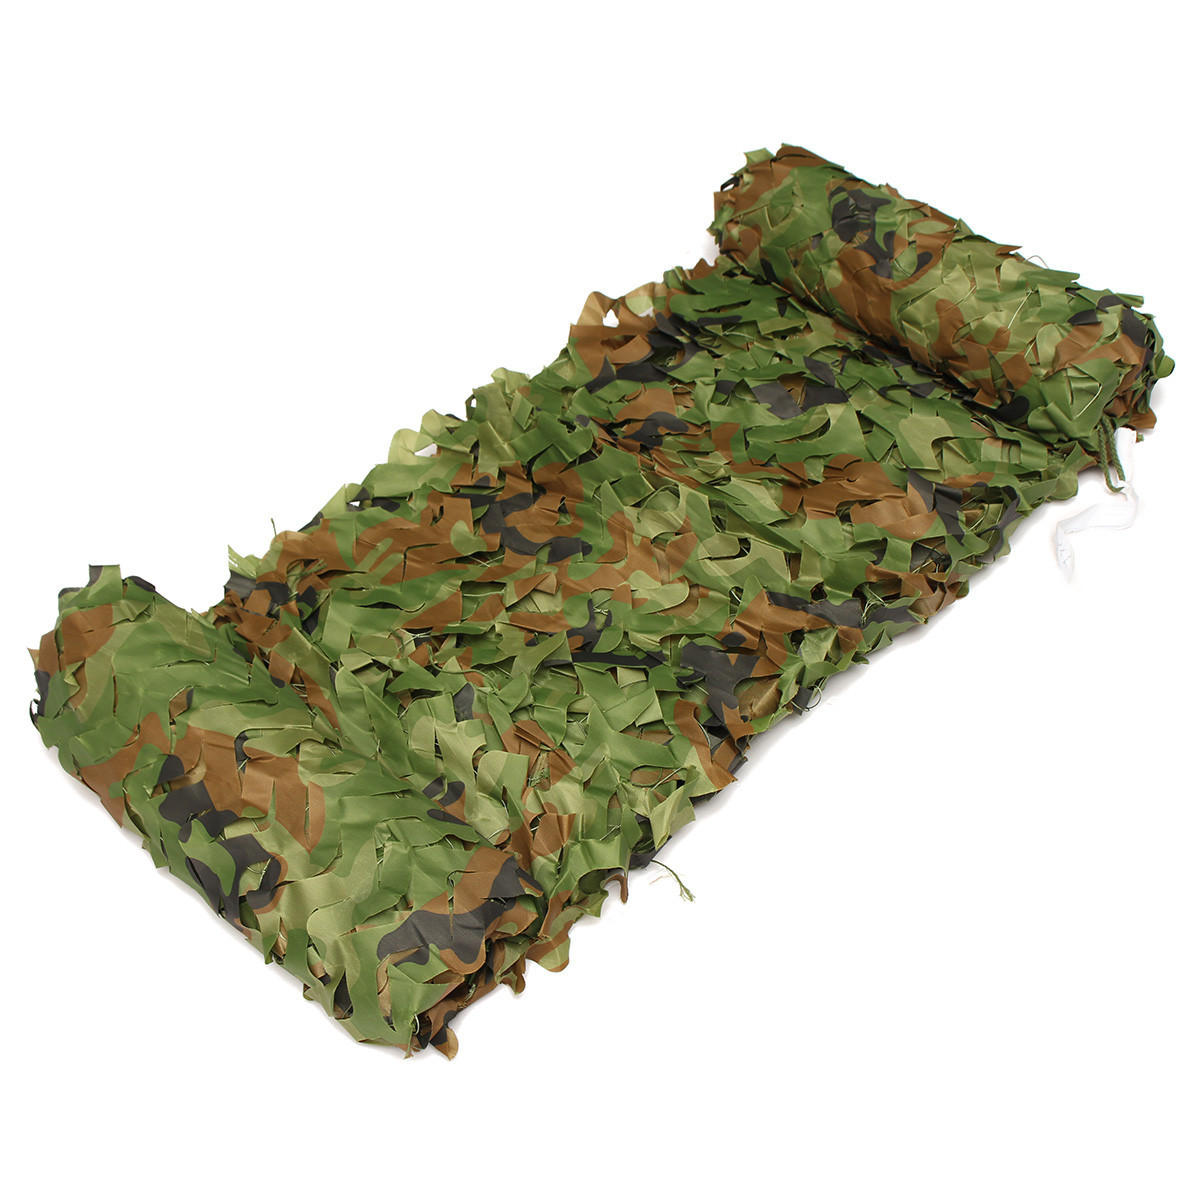 3x1.5m Camouflage Camouflage Camo Net Voor Camping Militaire Fotografie